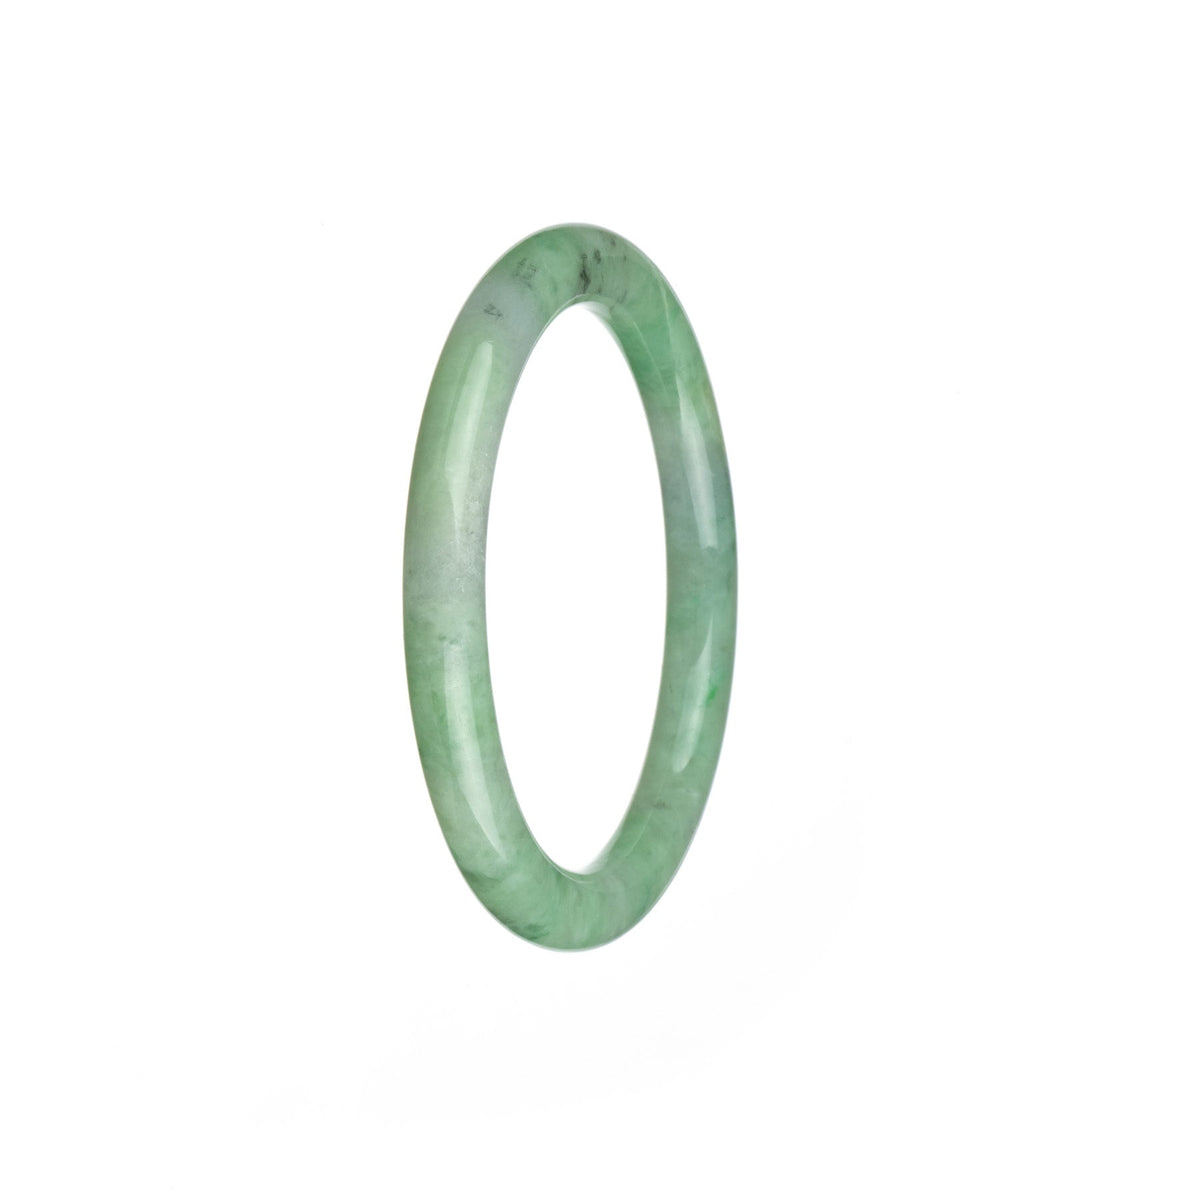 A petite round jade bracelet with a genuine natural green color and light green spots.